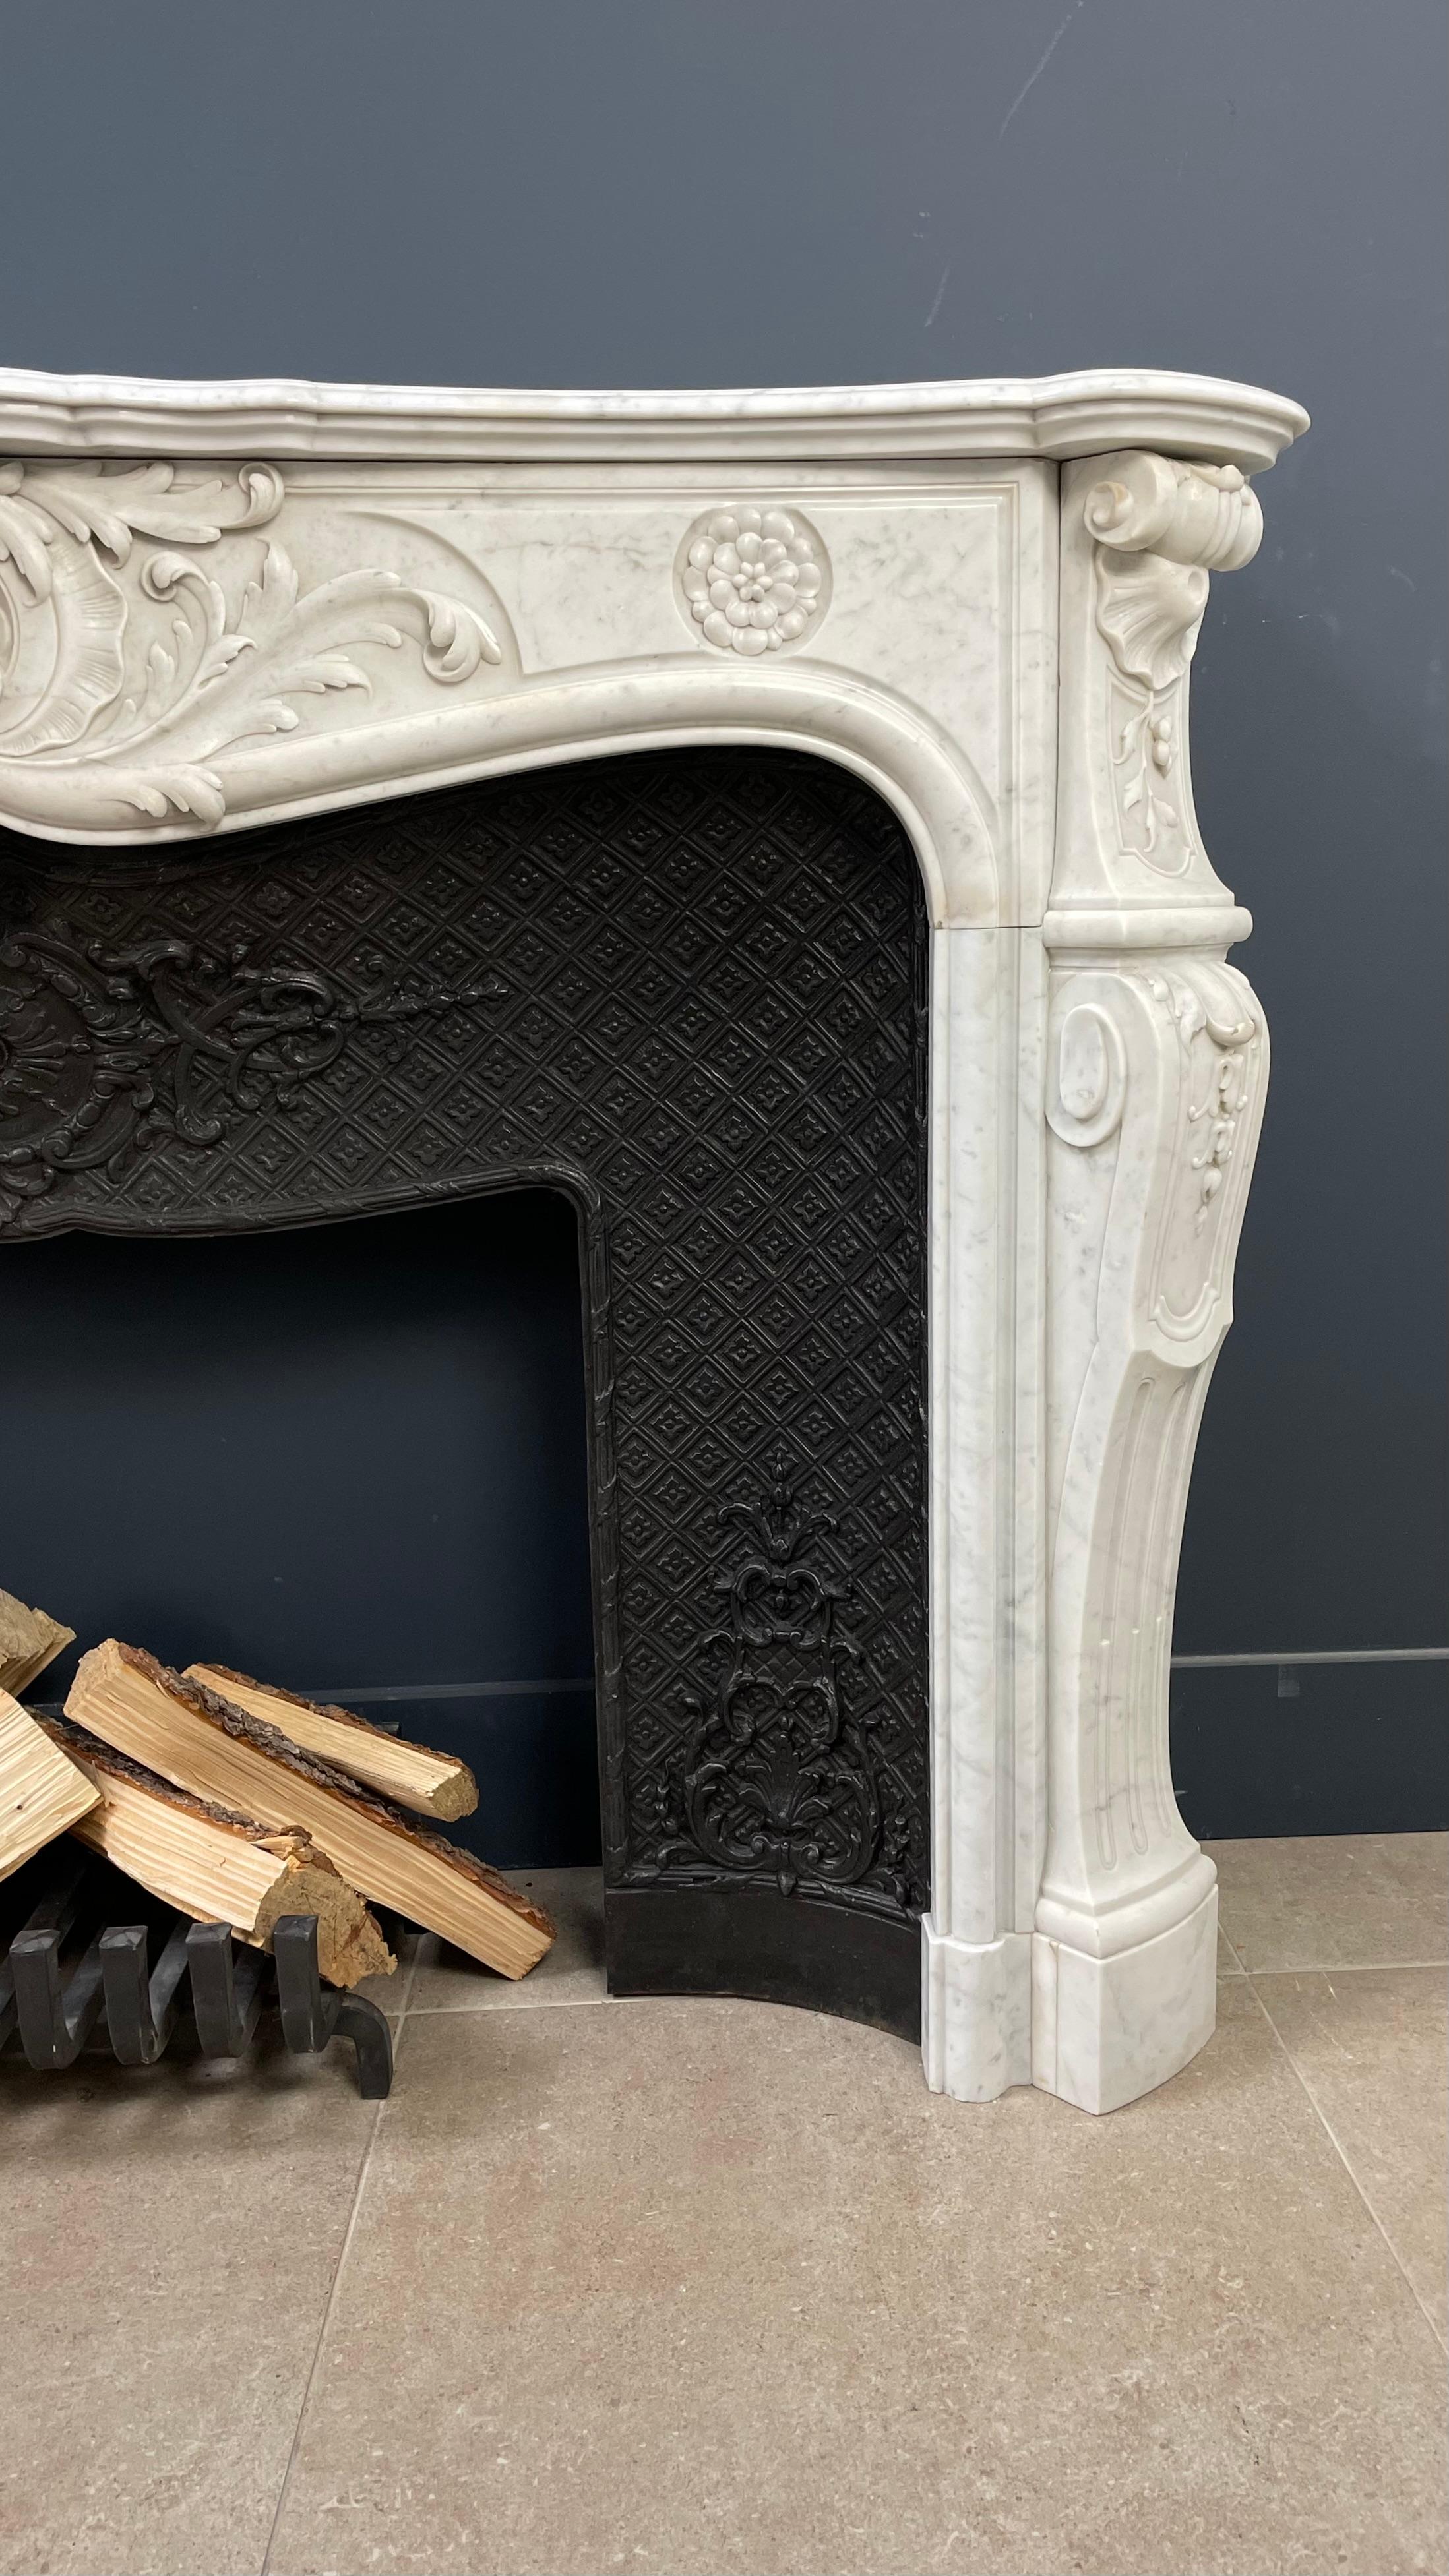 Introducing our exquisite French Antique Shell Fireplace, crafted from elegant white Carrara Marble. This luxurious antique fireplace is accompanied by a specially designed cast iron fireplace insert, perfectly tailored to complement its timeless